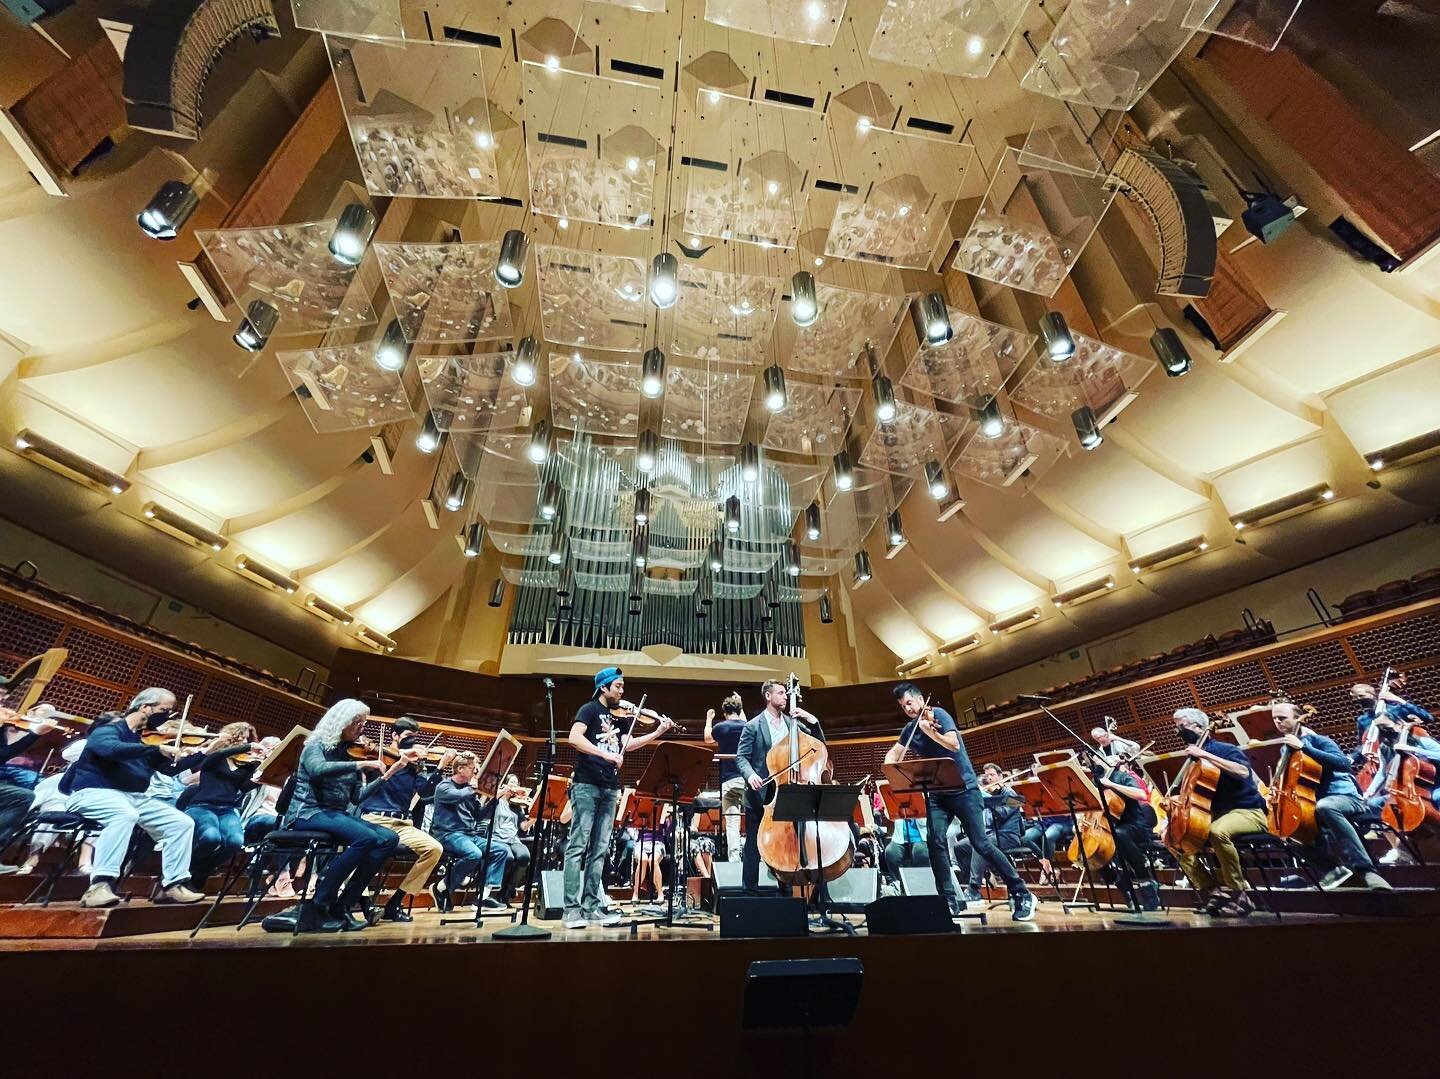 First rehearsal done with the @sfsymphony !! What an amazing group of musicians.  Come see us play at Davies Hall on the 14th or Frost Amphitheater on the 15th! ✌️✌️✌️